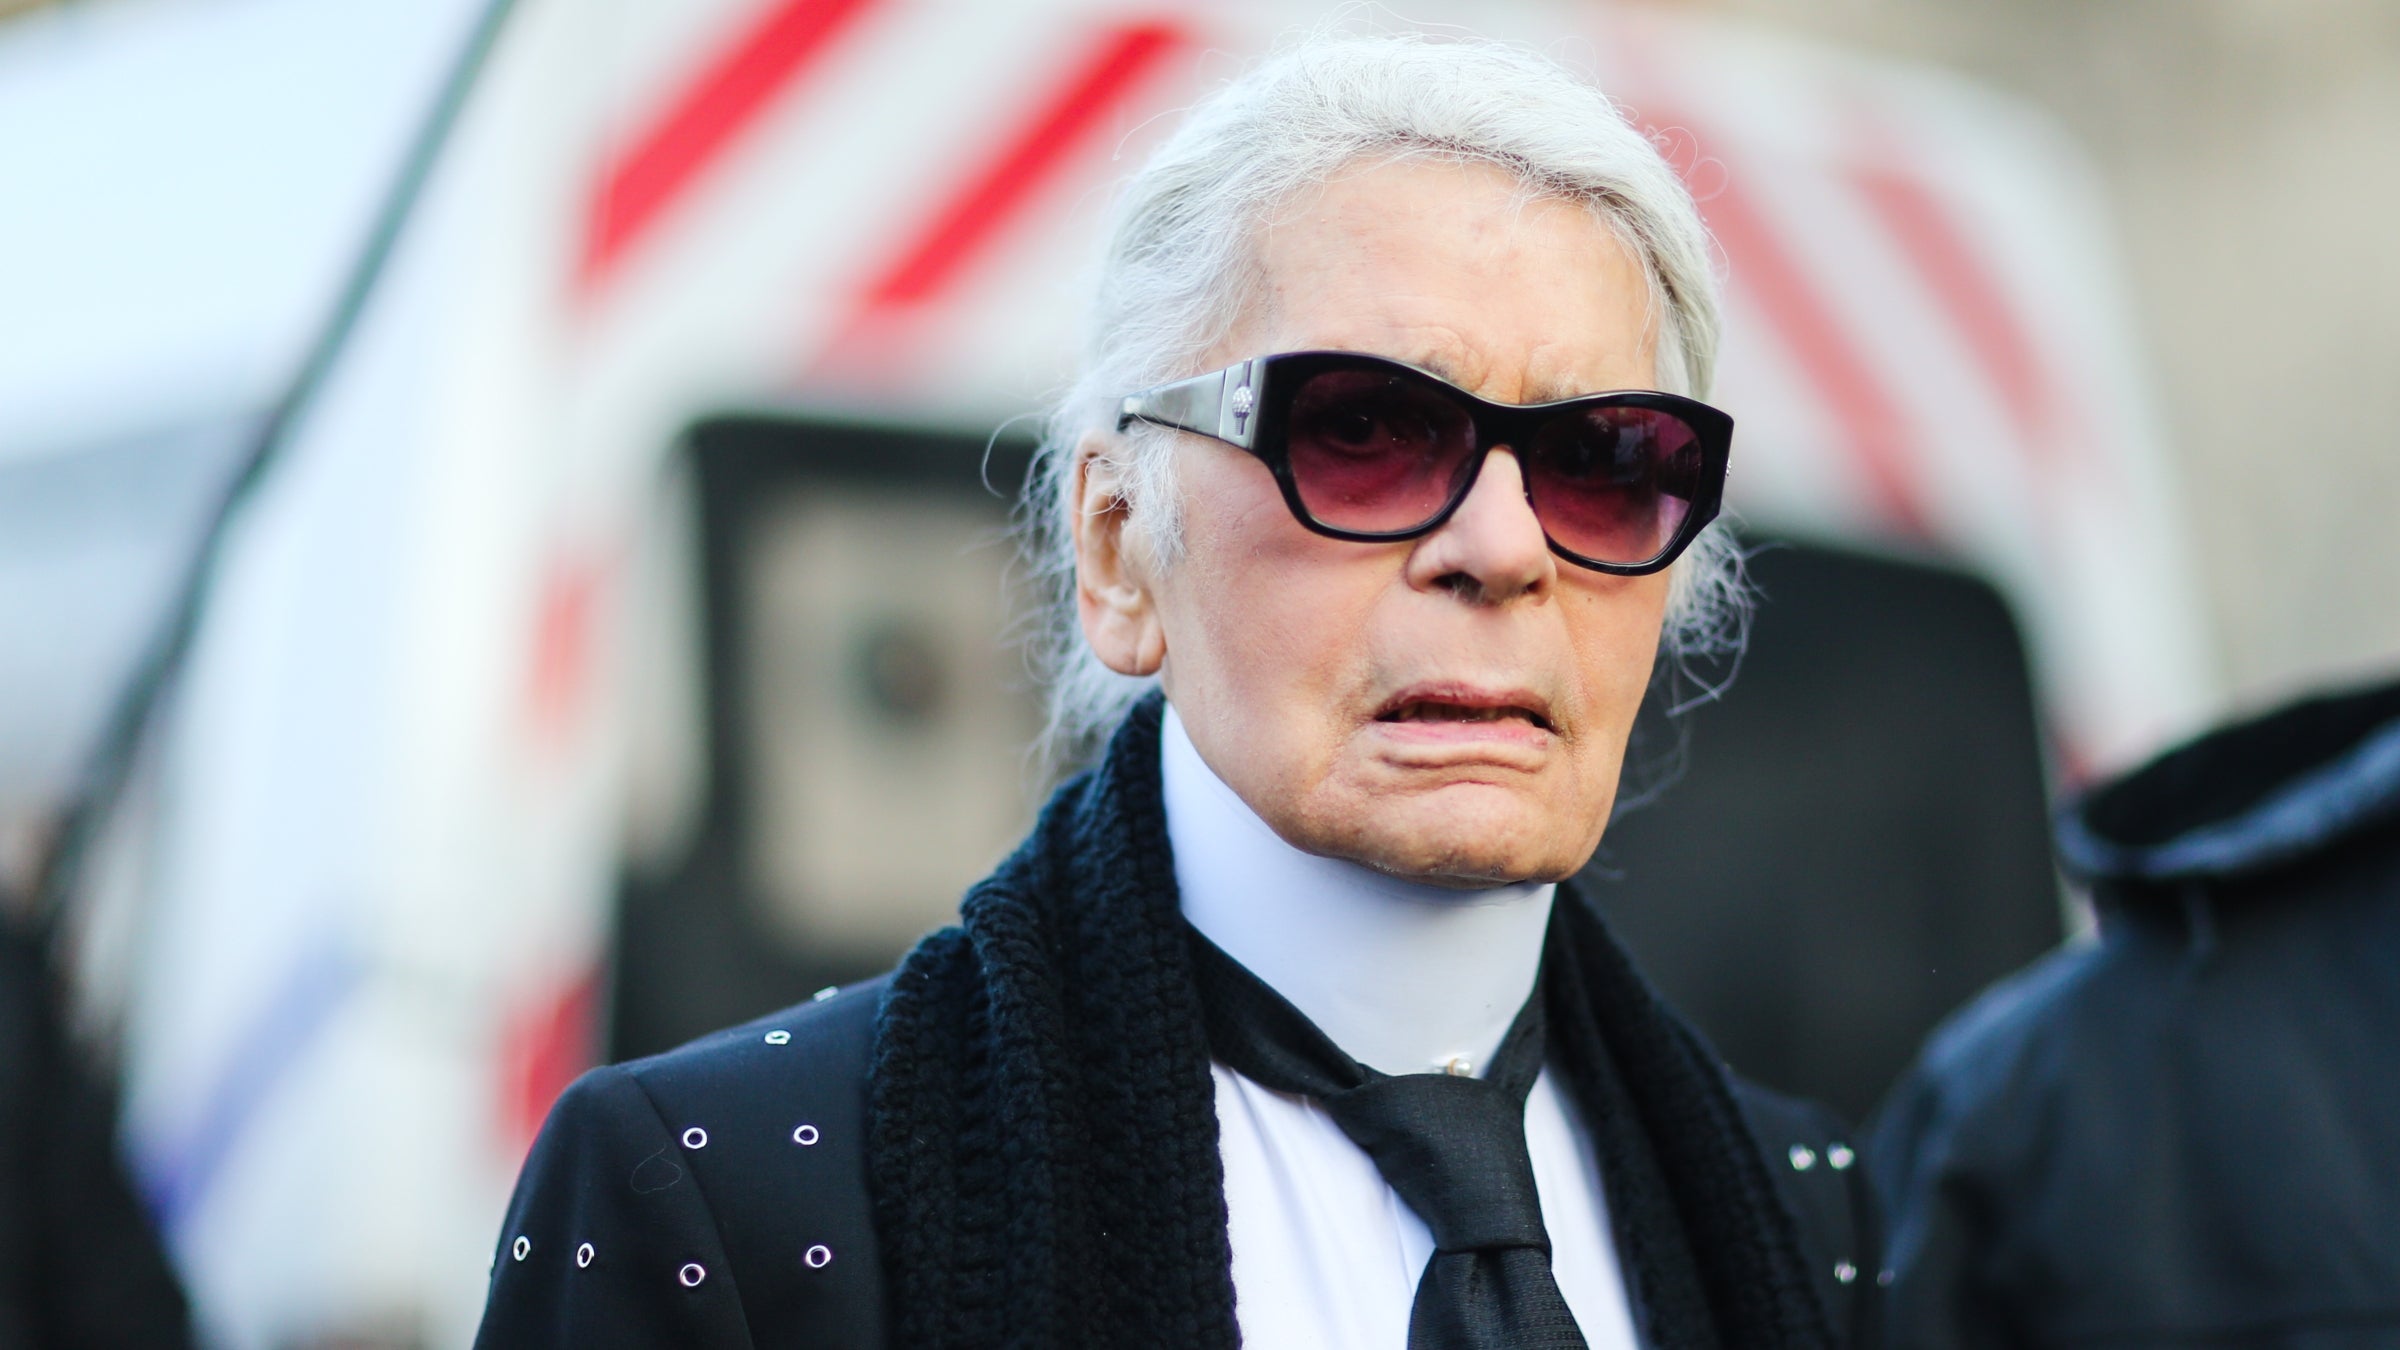 Karl Lagerfeld's most memorable designs of all time